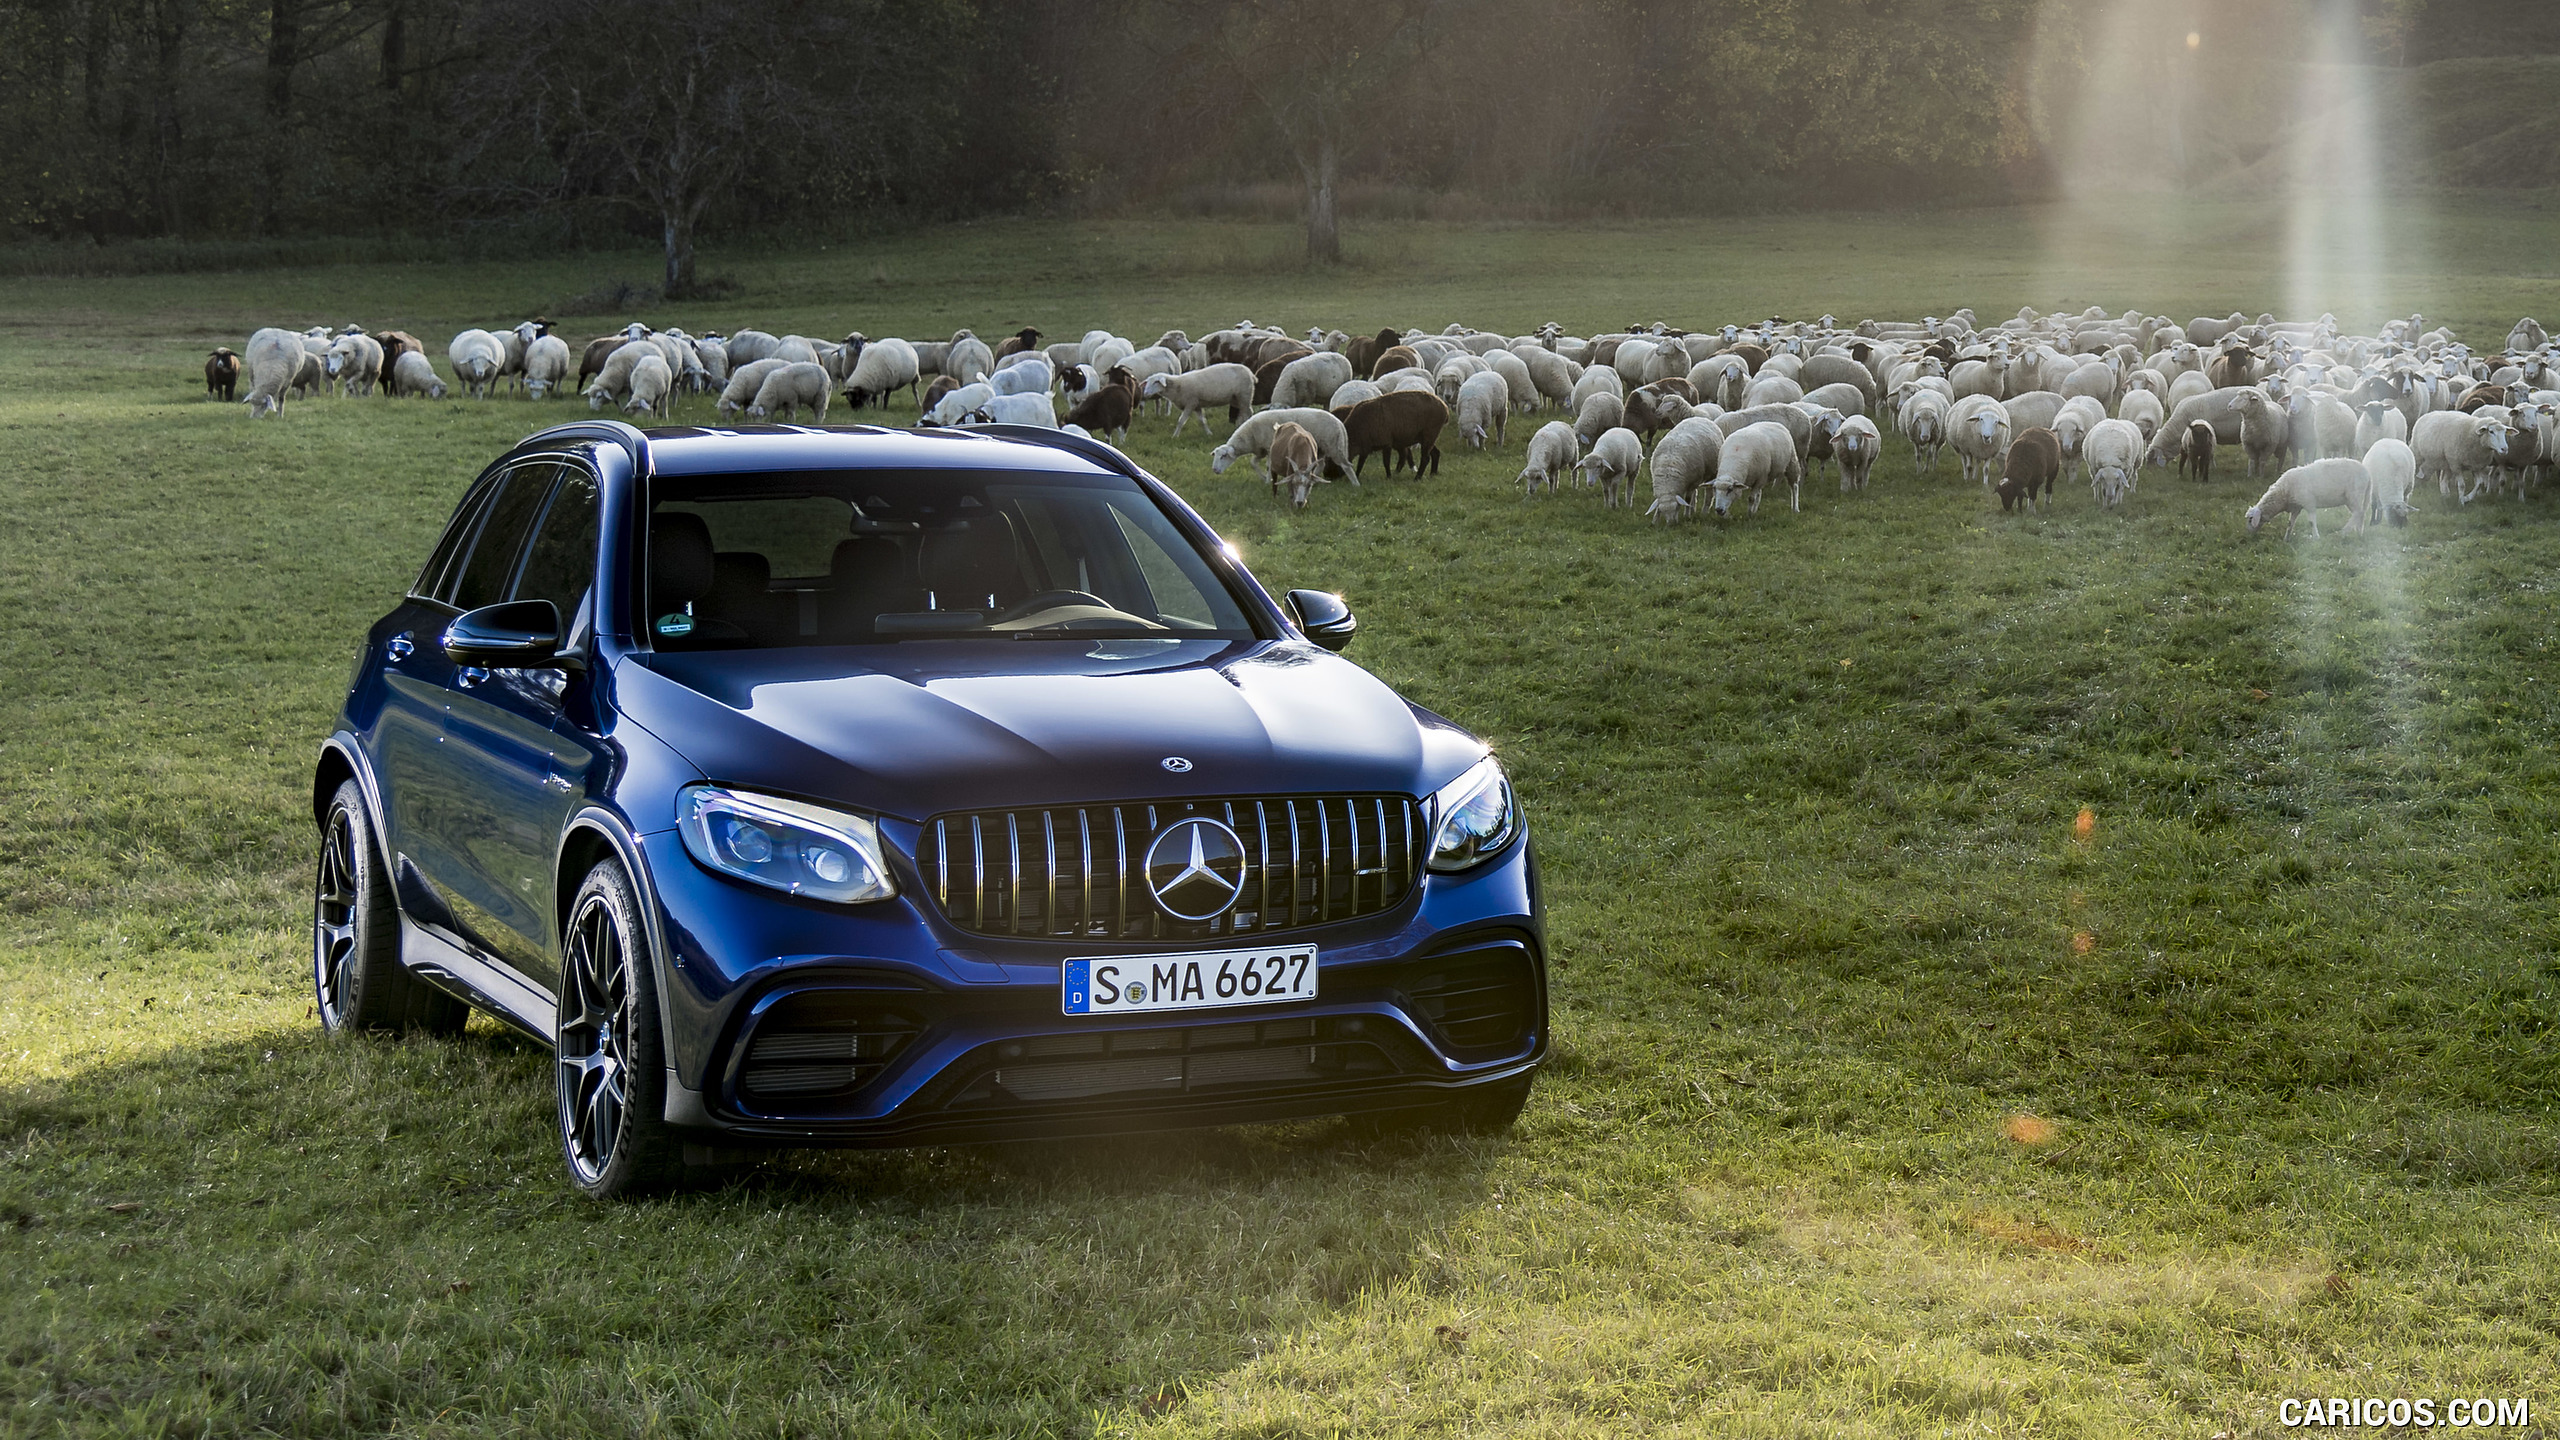 2018 Mercedes-AMG GLC 63 - Front, #38 of 115